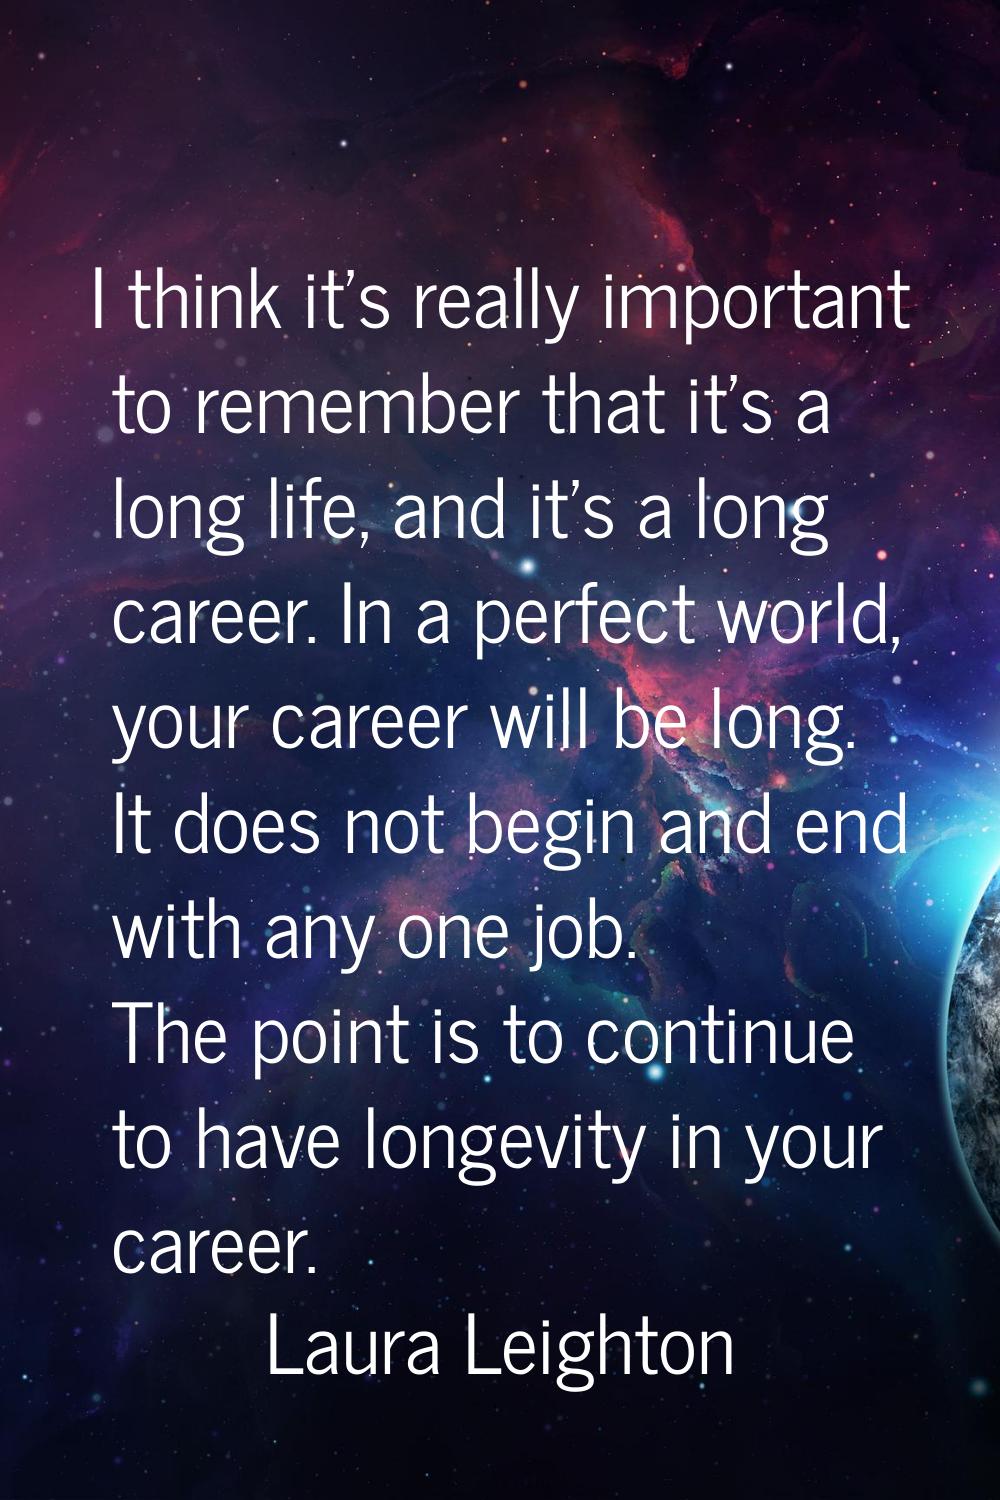 I think it's really important to remember that it's a long life, and it's a long career. In a perfe